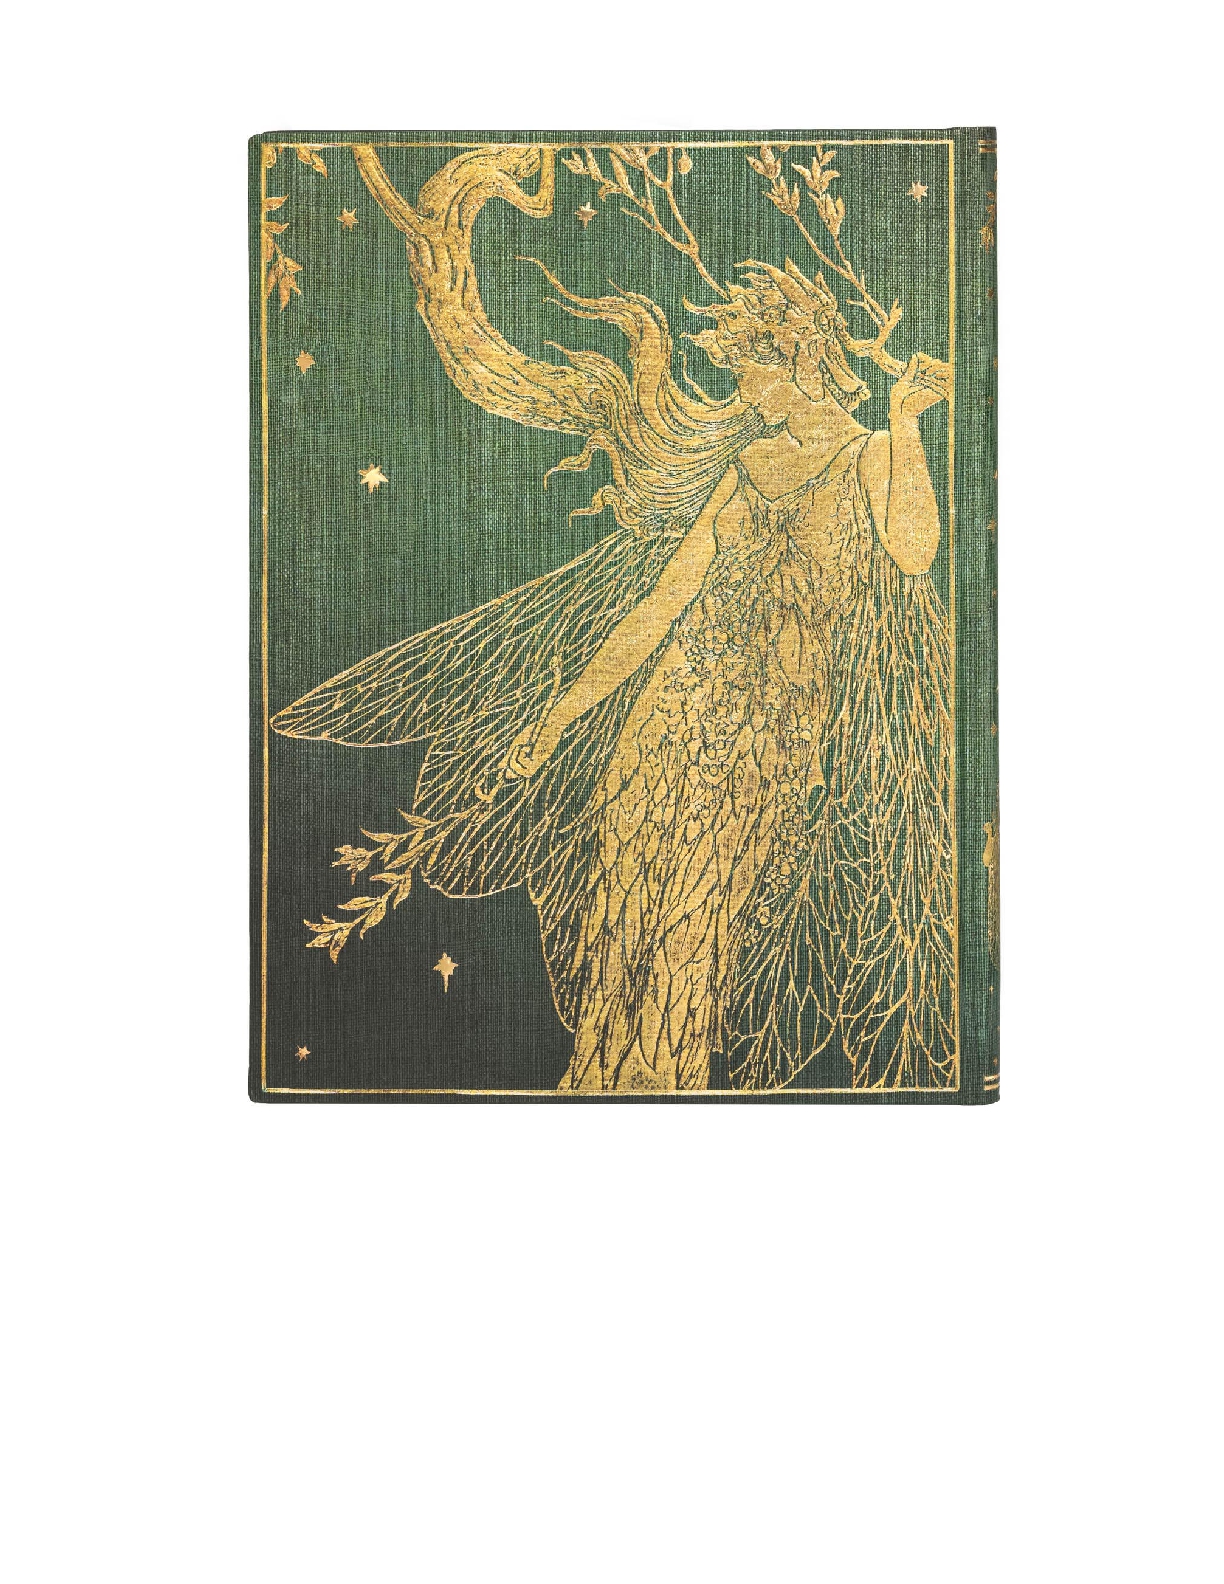 Olive Fairy, Lang's Fairy Books, Hardcover Journal, Ultra, Unlined, Elastic Band Closure, 144 Pg, 120 GSM